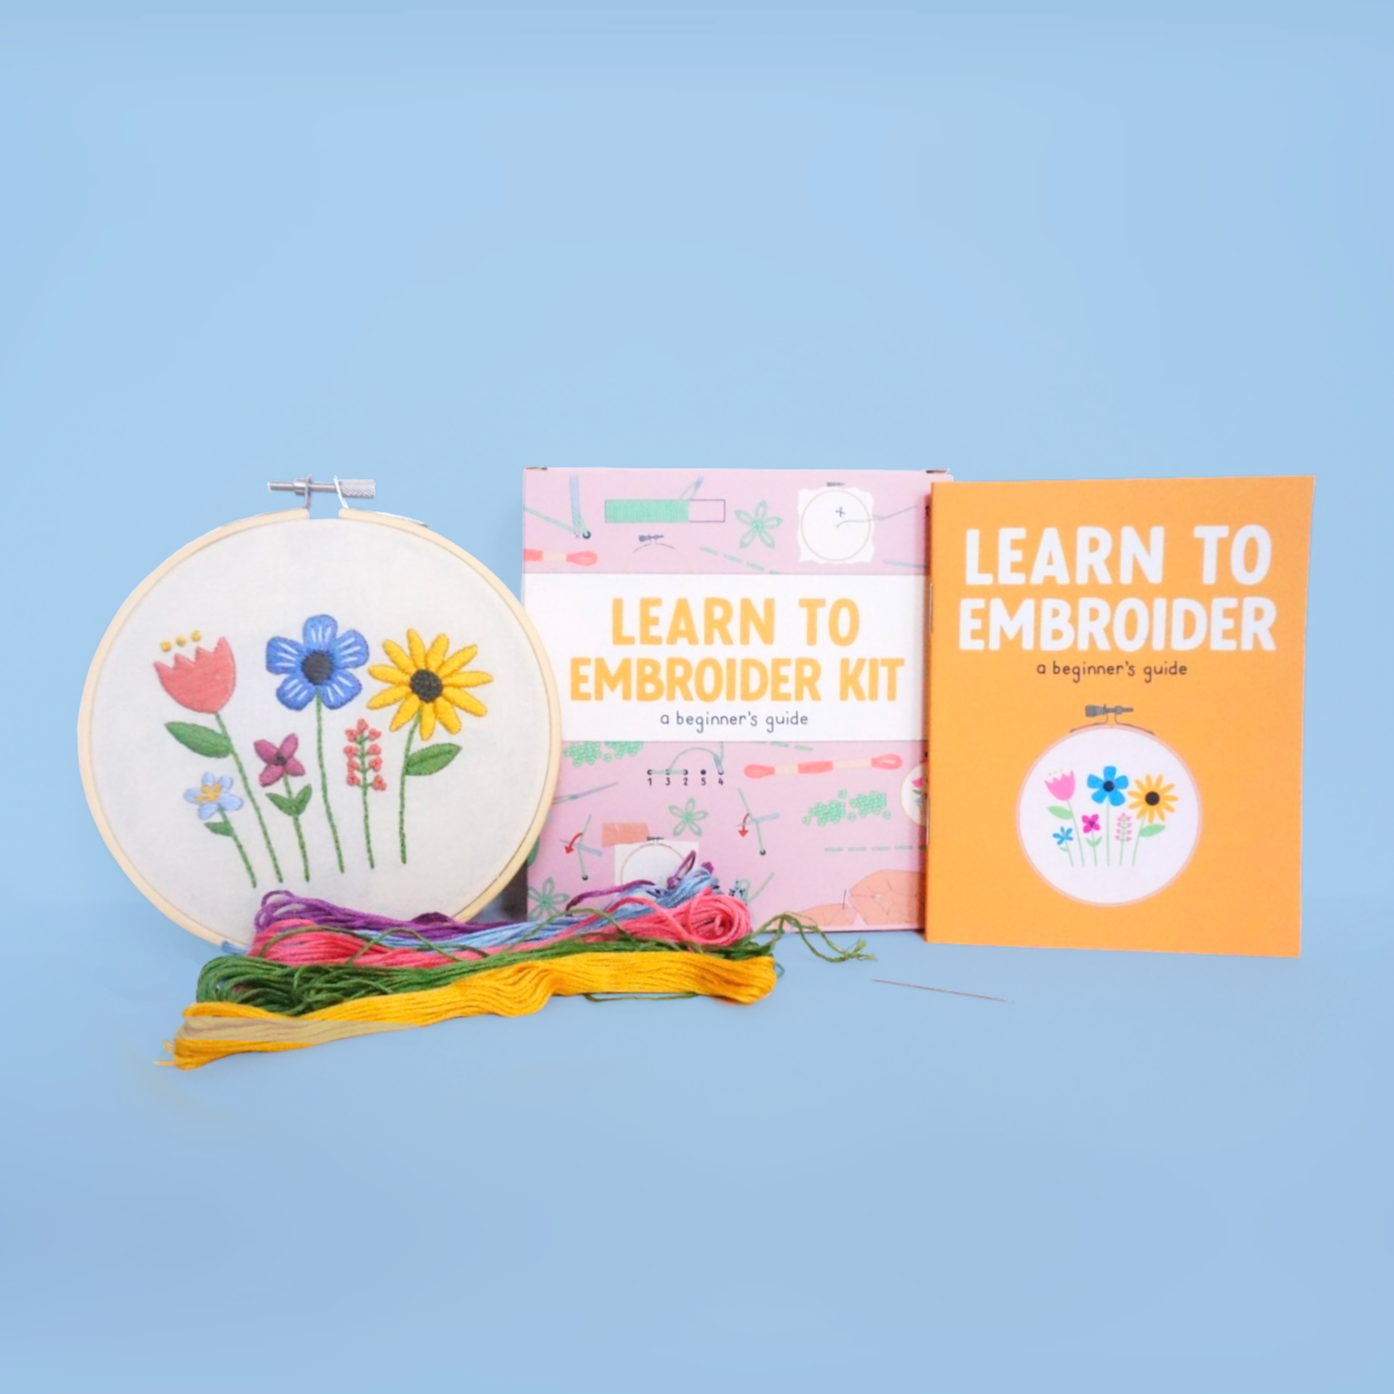 Learn to embroider kit, Bordal